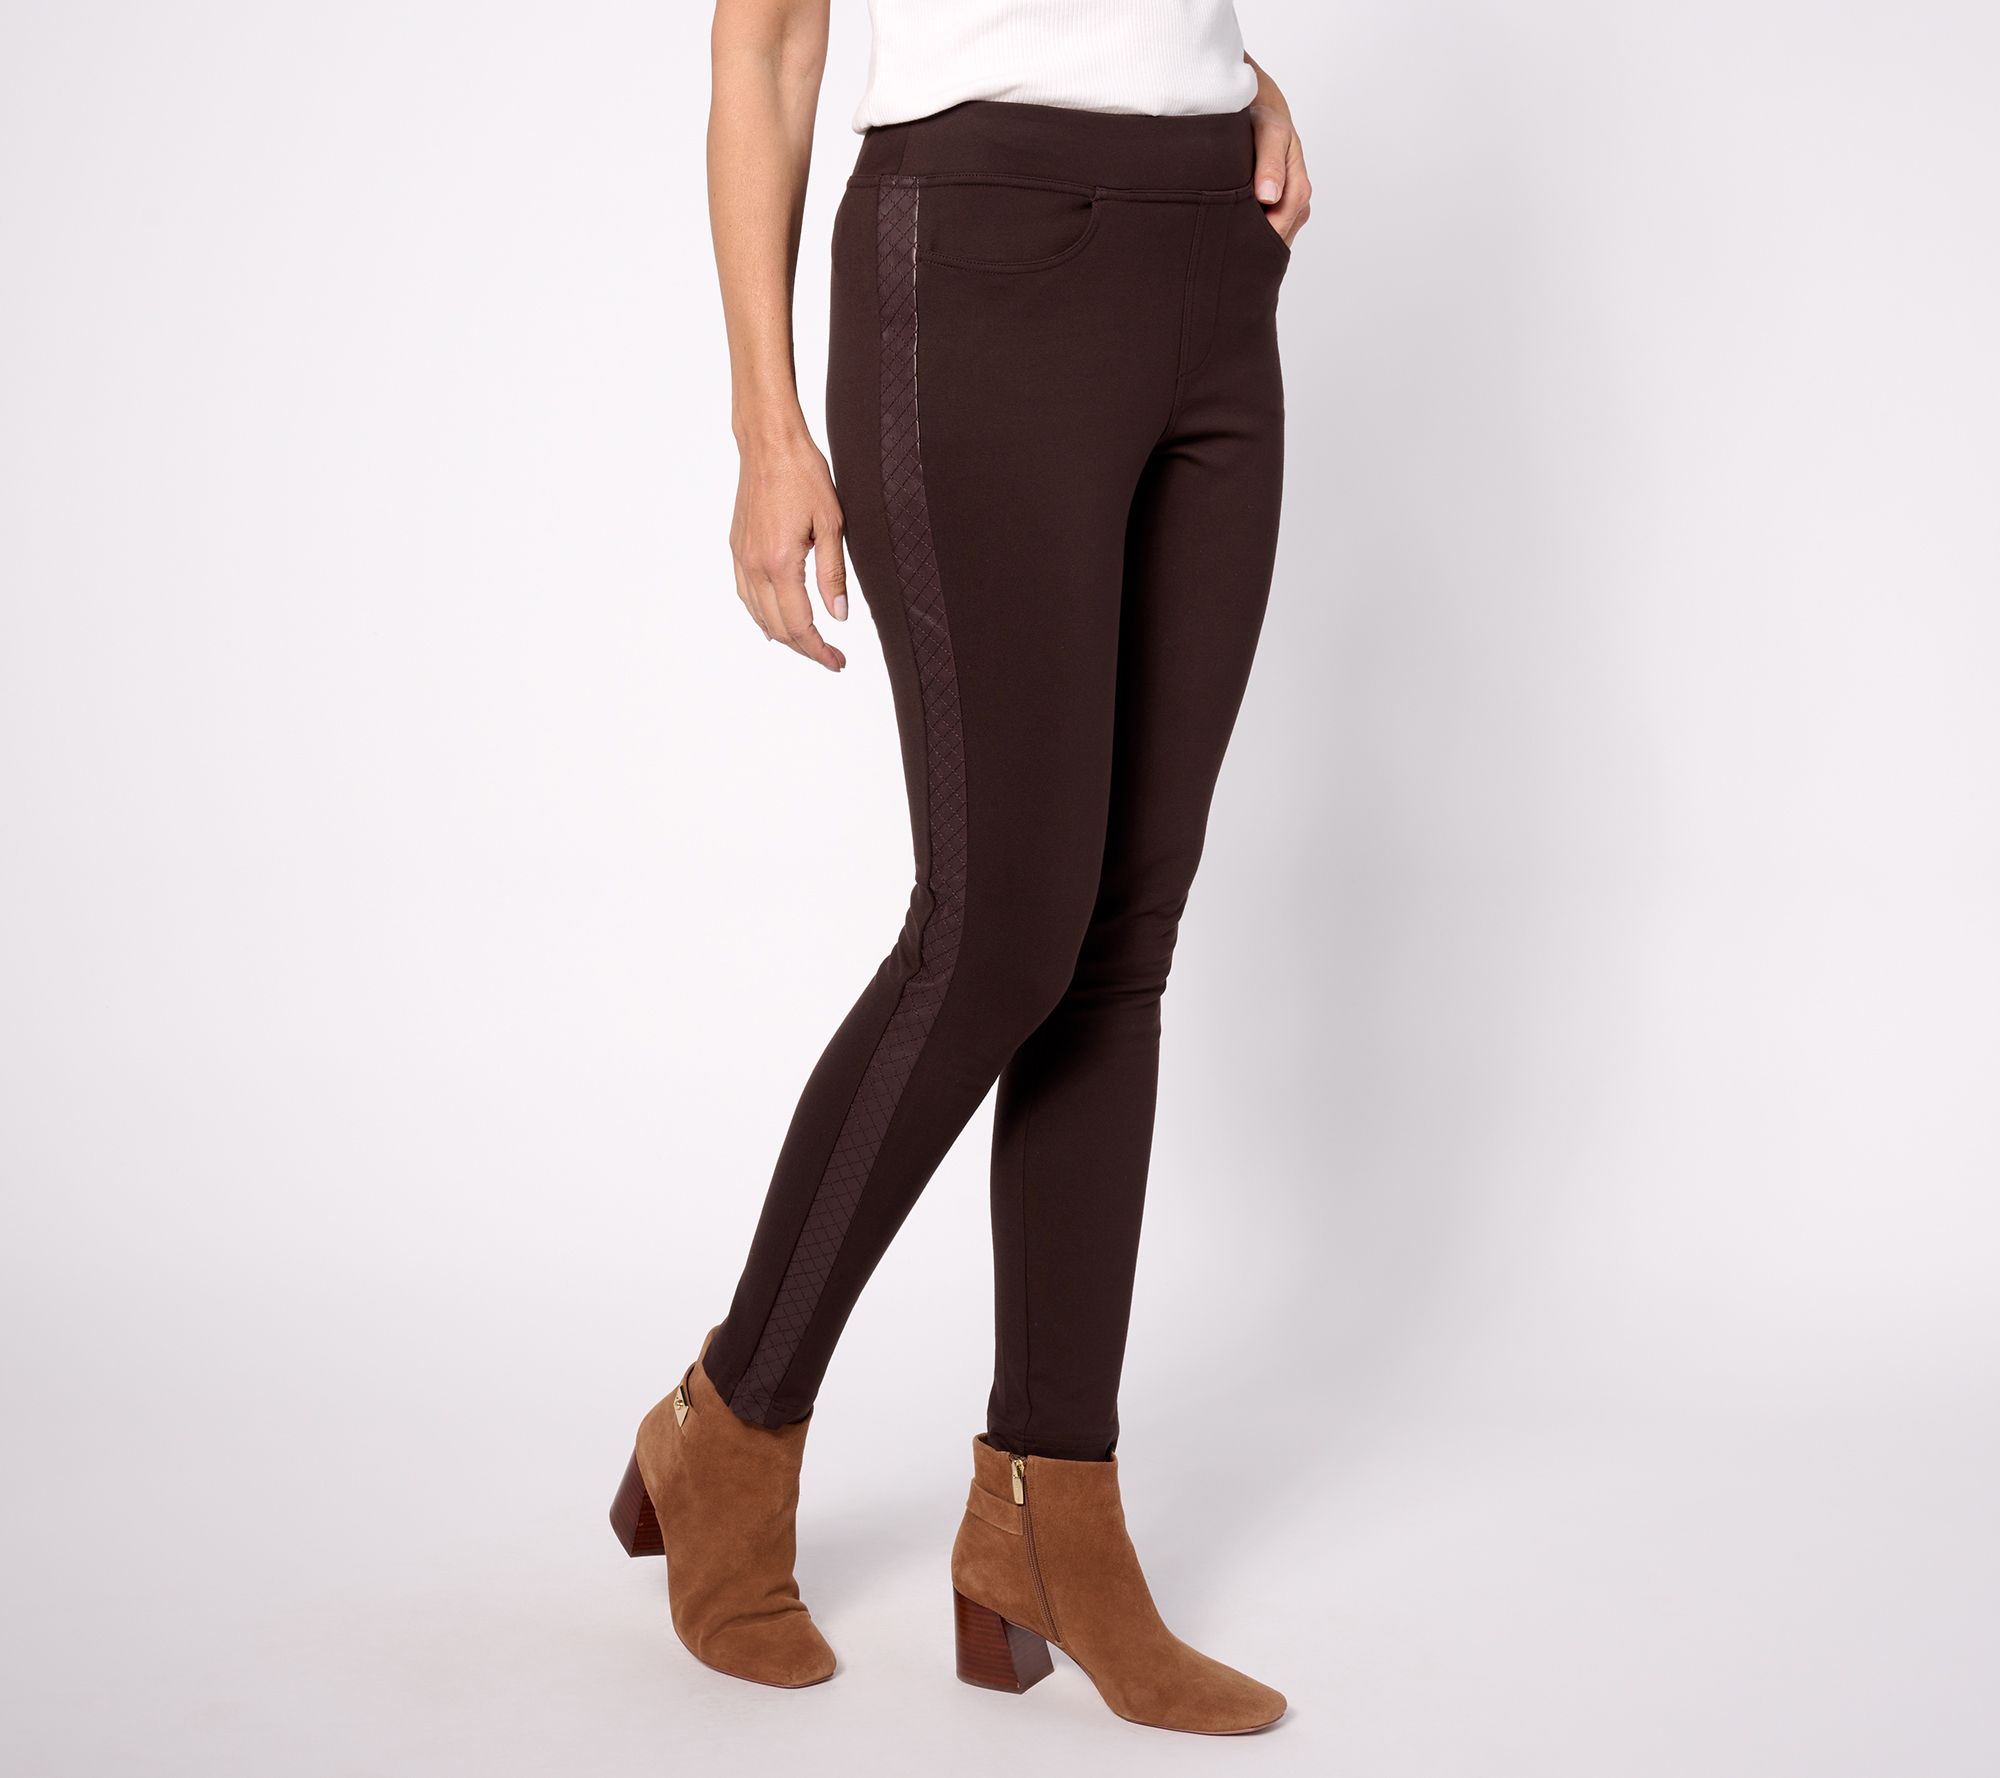 Petite Chocolate Faux Leather Pants